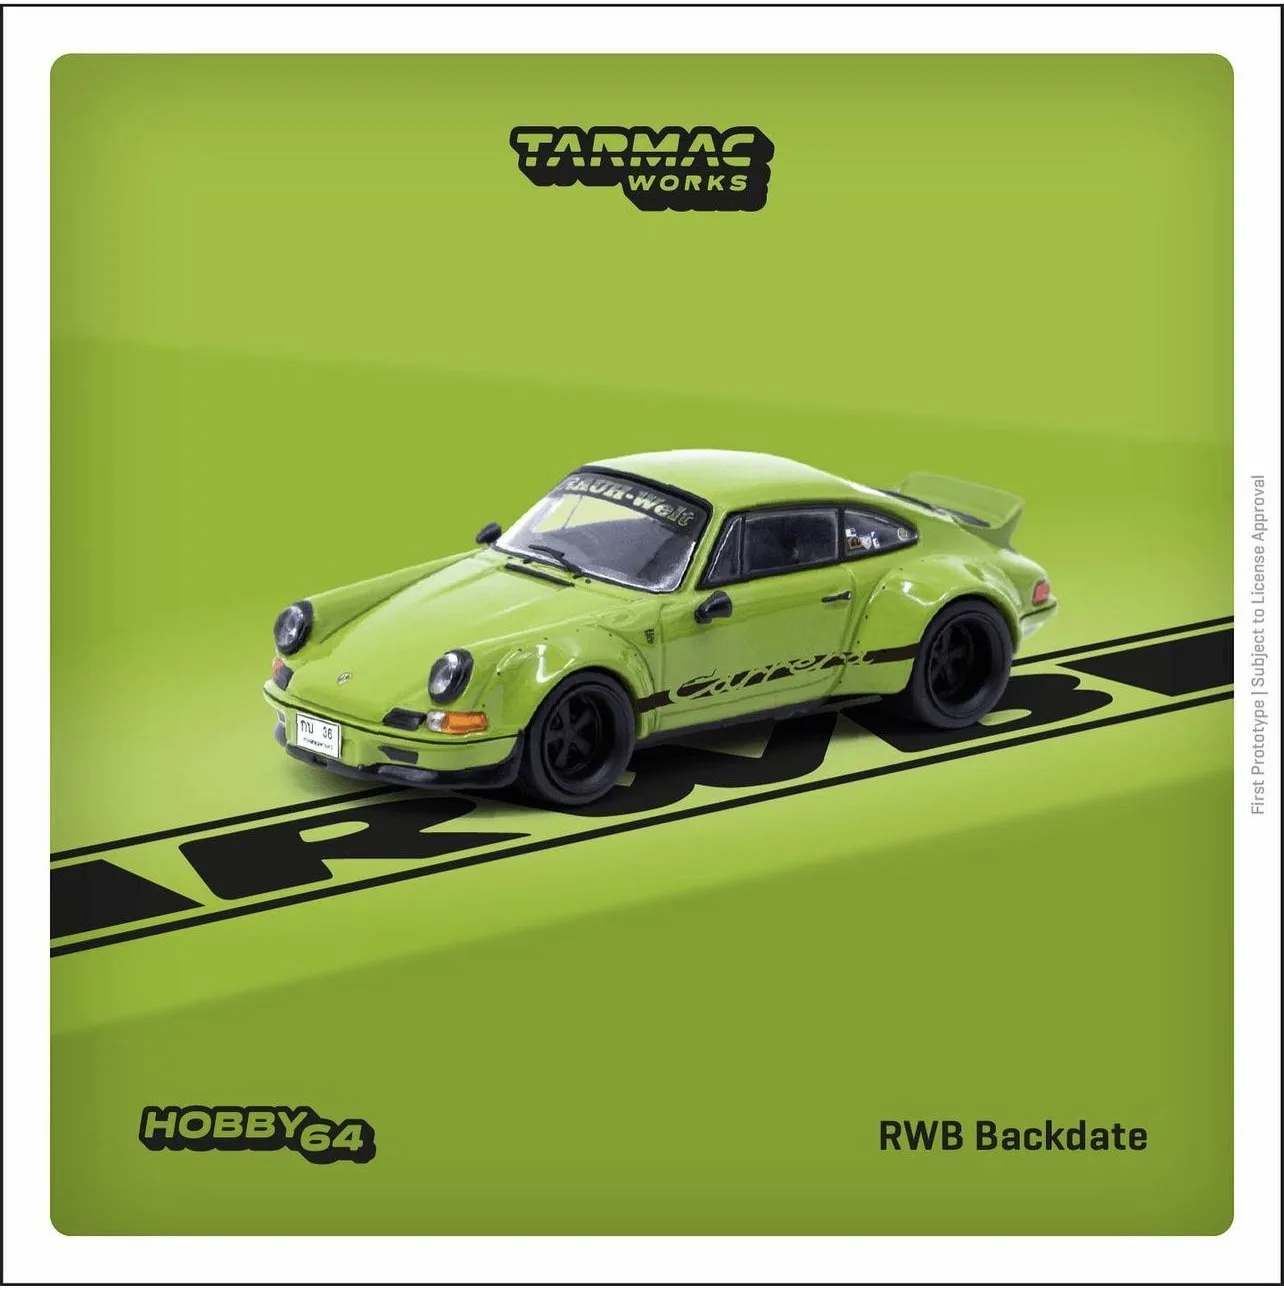 

TW In Stock 1:64 911 964 RWB Backdate Olive Green Alloy Diorama Car Model Collection Miniature Carros Toys Tarmac Works